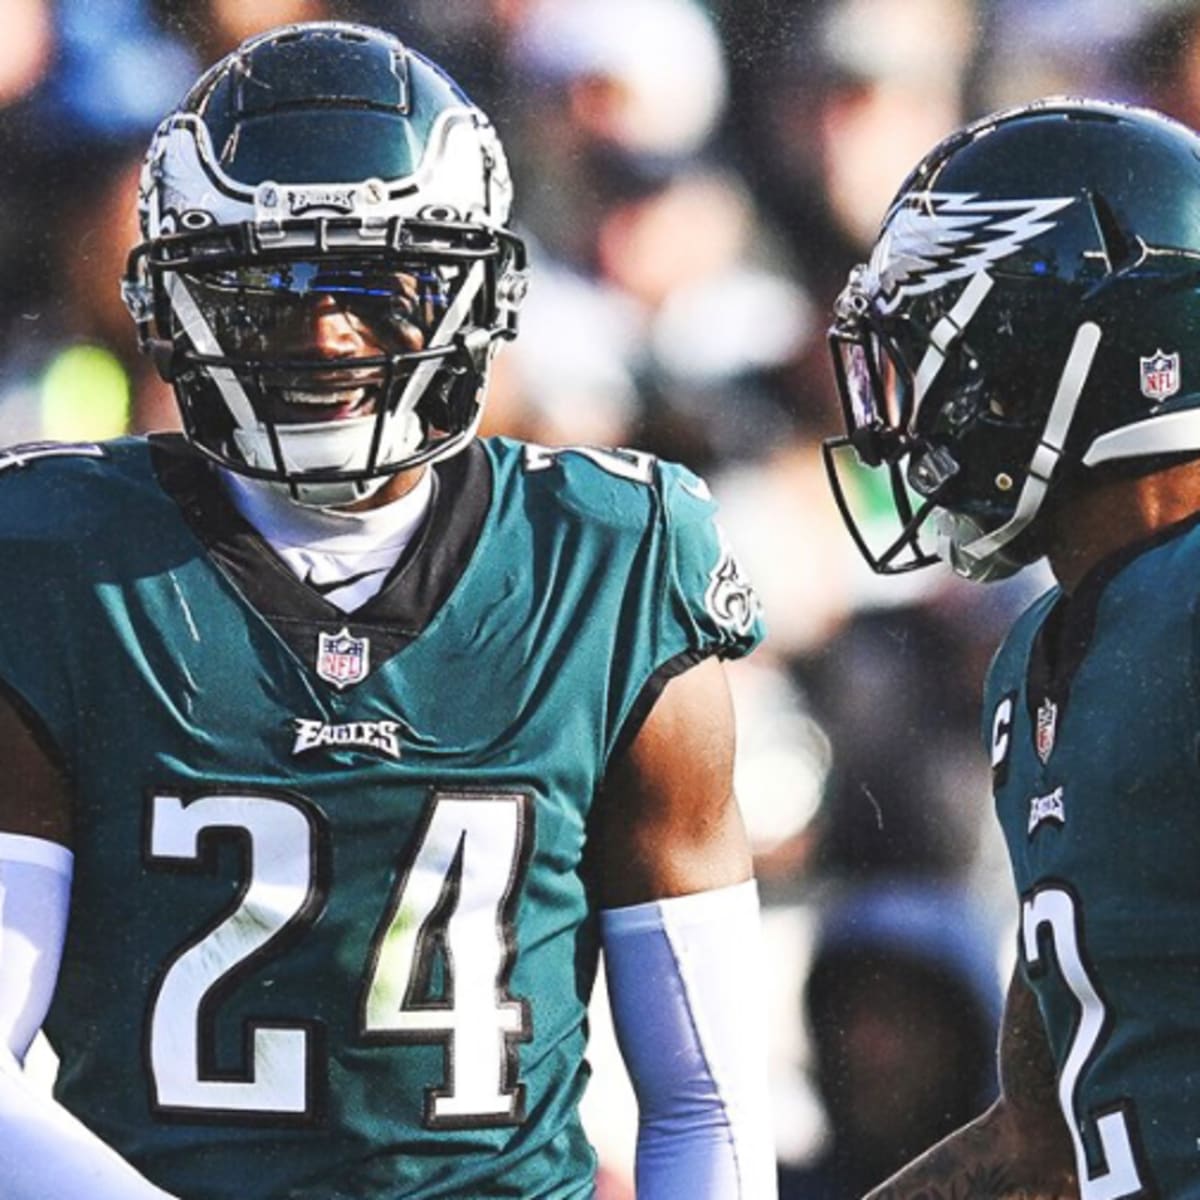 Eagles cornerback James Bradberry contemplates an uncertain future after  late play infamy